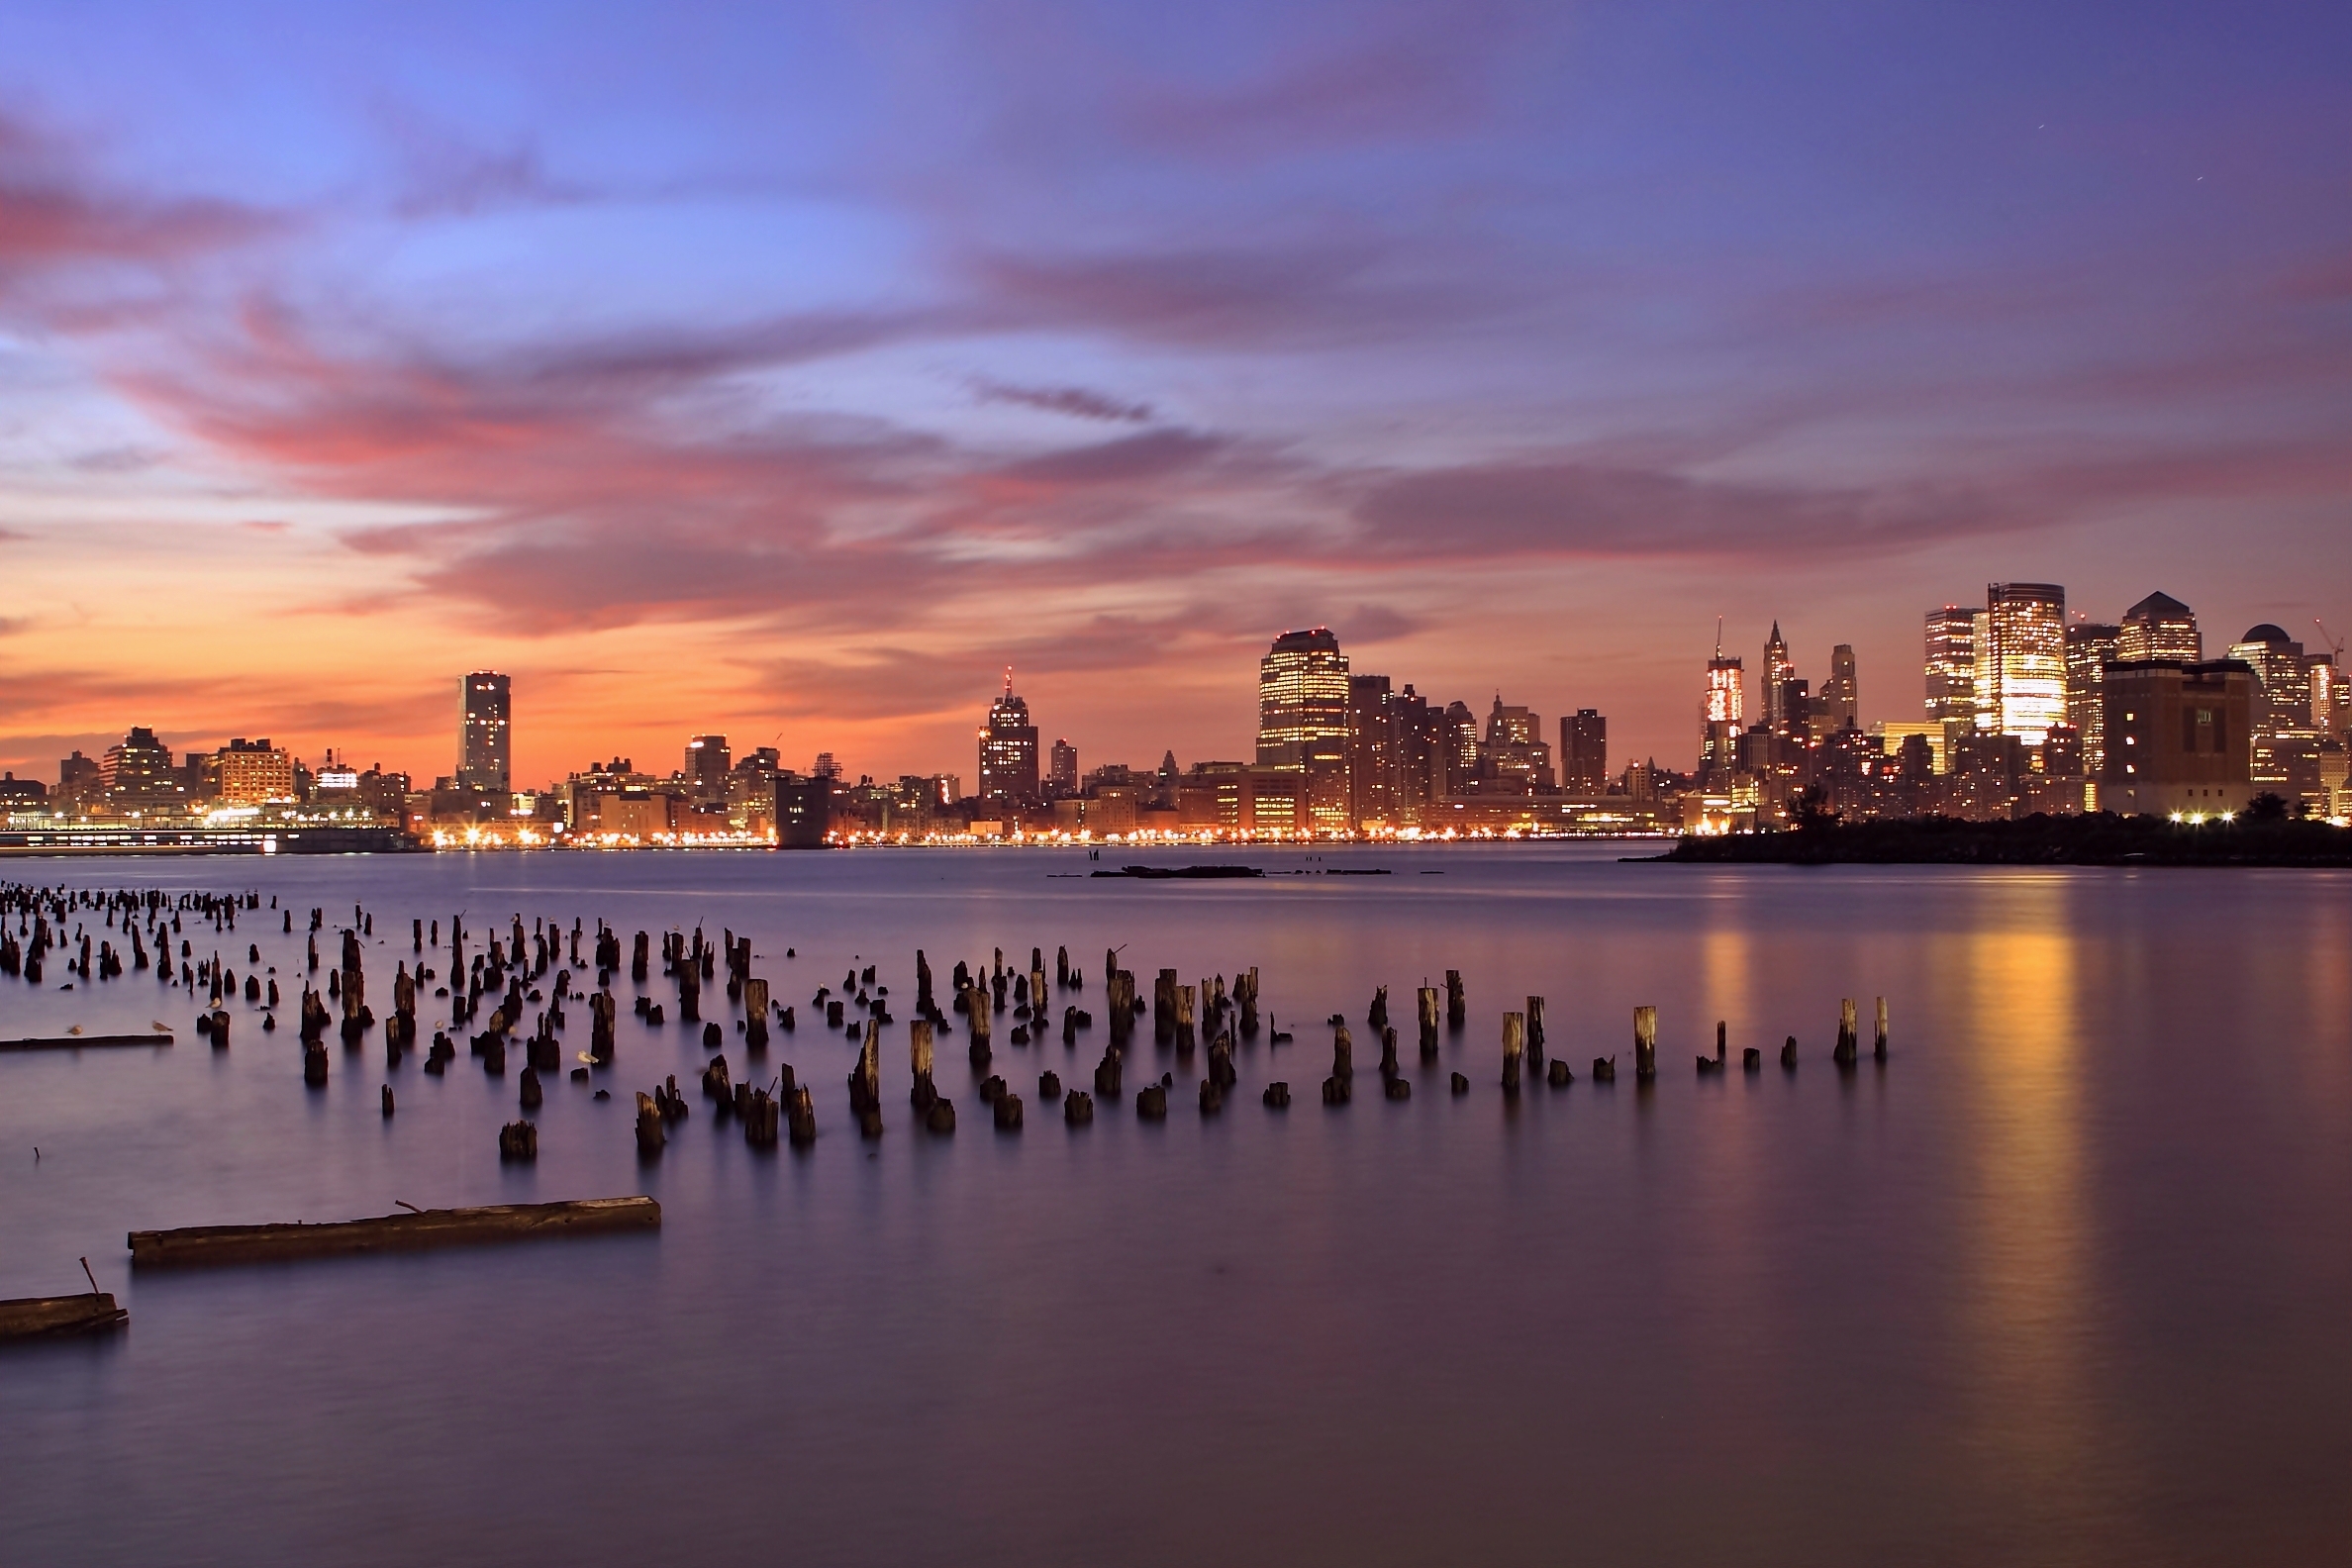 cities, rivers, sunset, sky, lilac, clouds, usa, orange, lights, wooden, skyscrapers, backlight, illumination, evening, united states, pillars, jersey city, state of new jersey, new jersey state, hudson, columns cell phone wallpapers